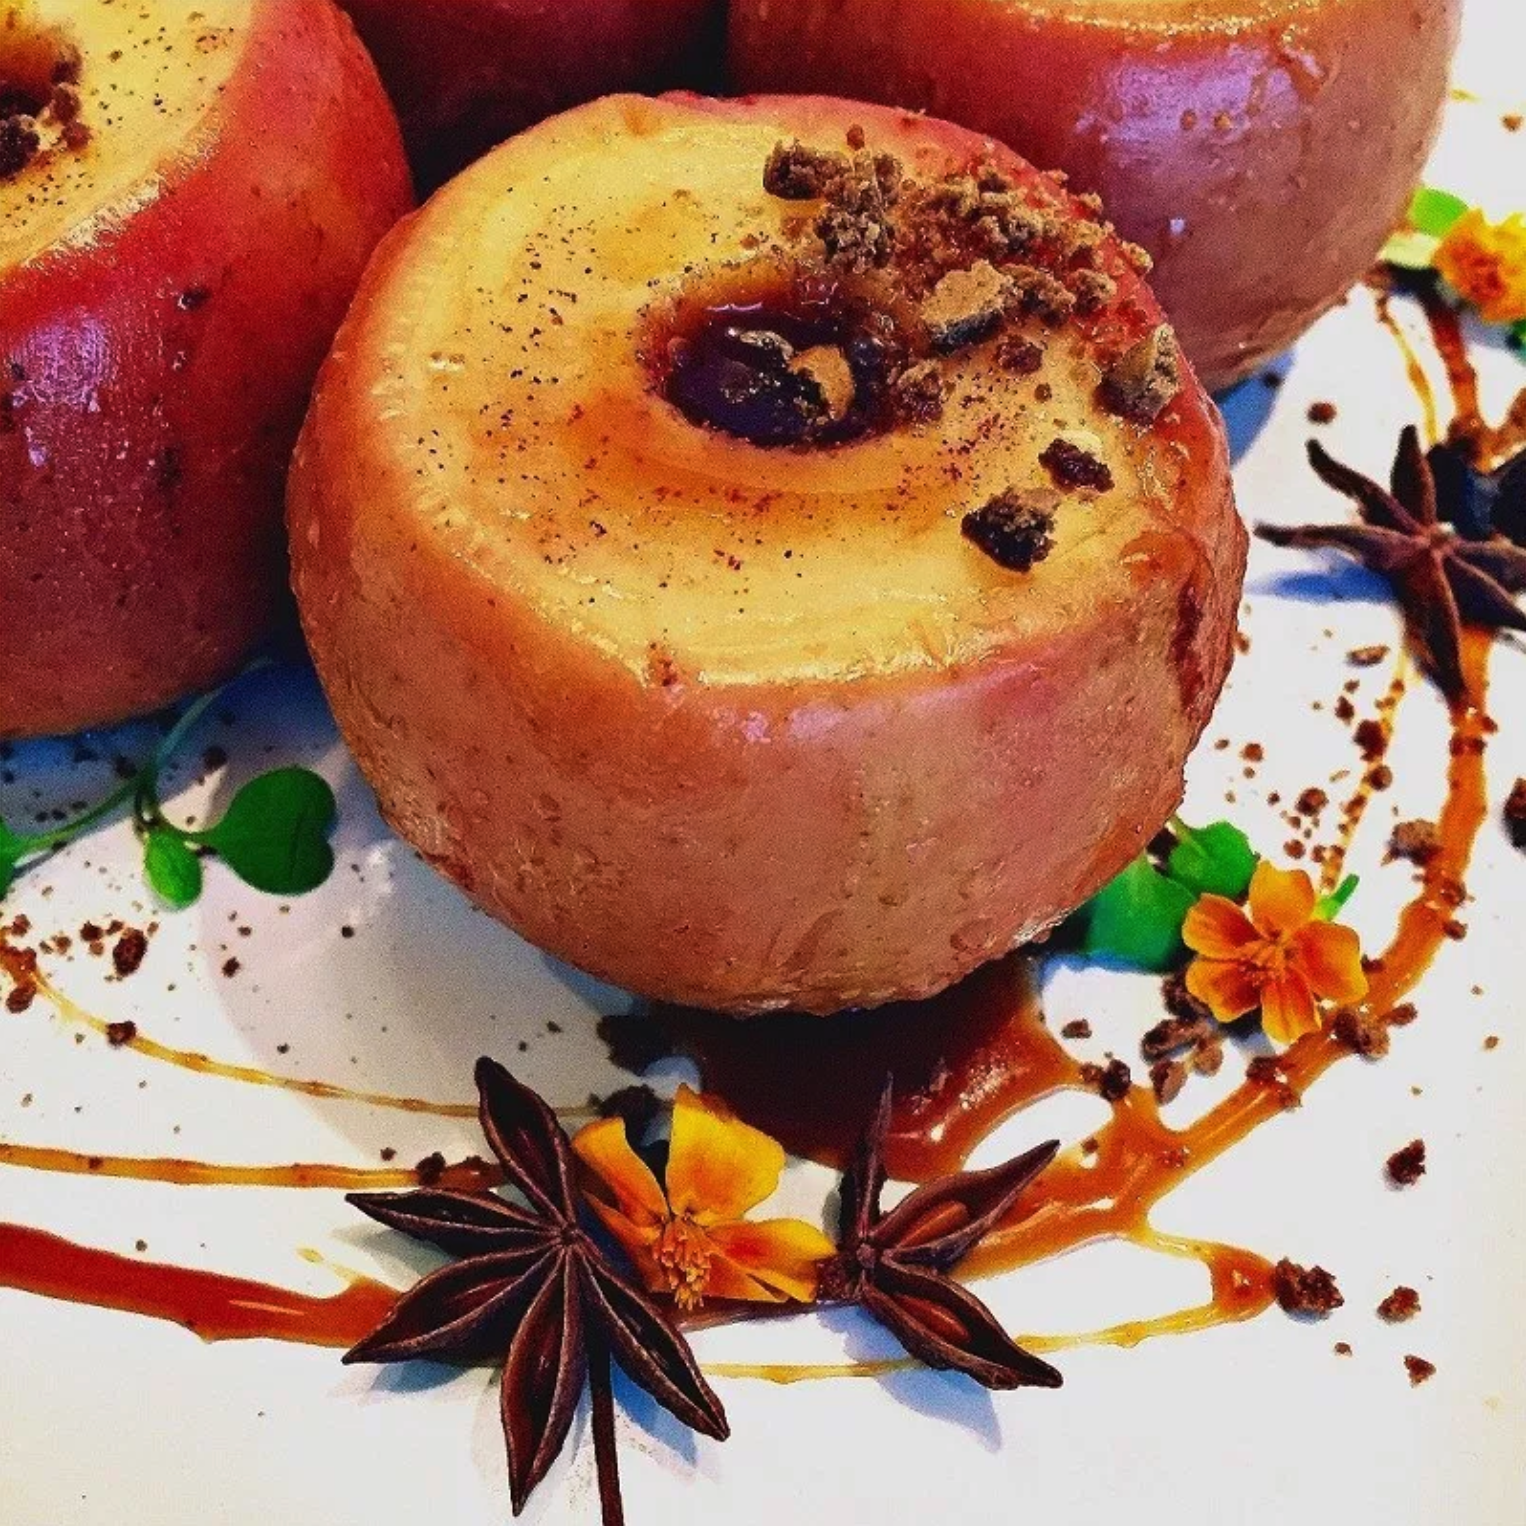 Make These Delicious Ginger Caramel Baked Apples at Home